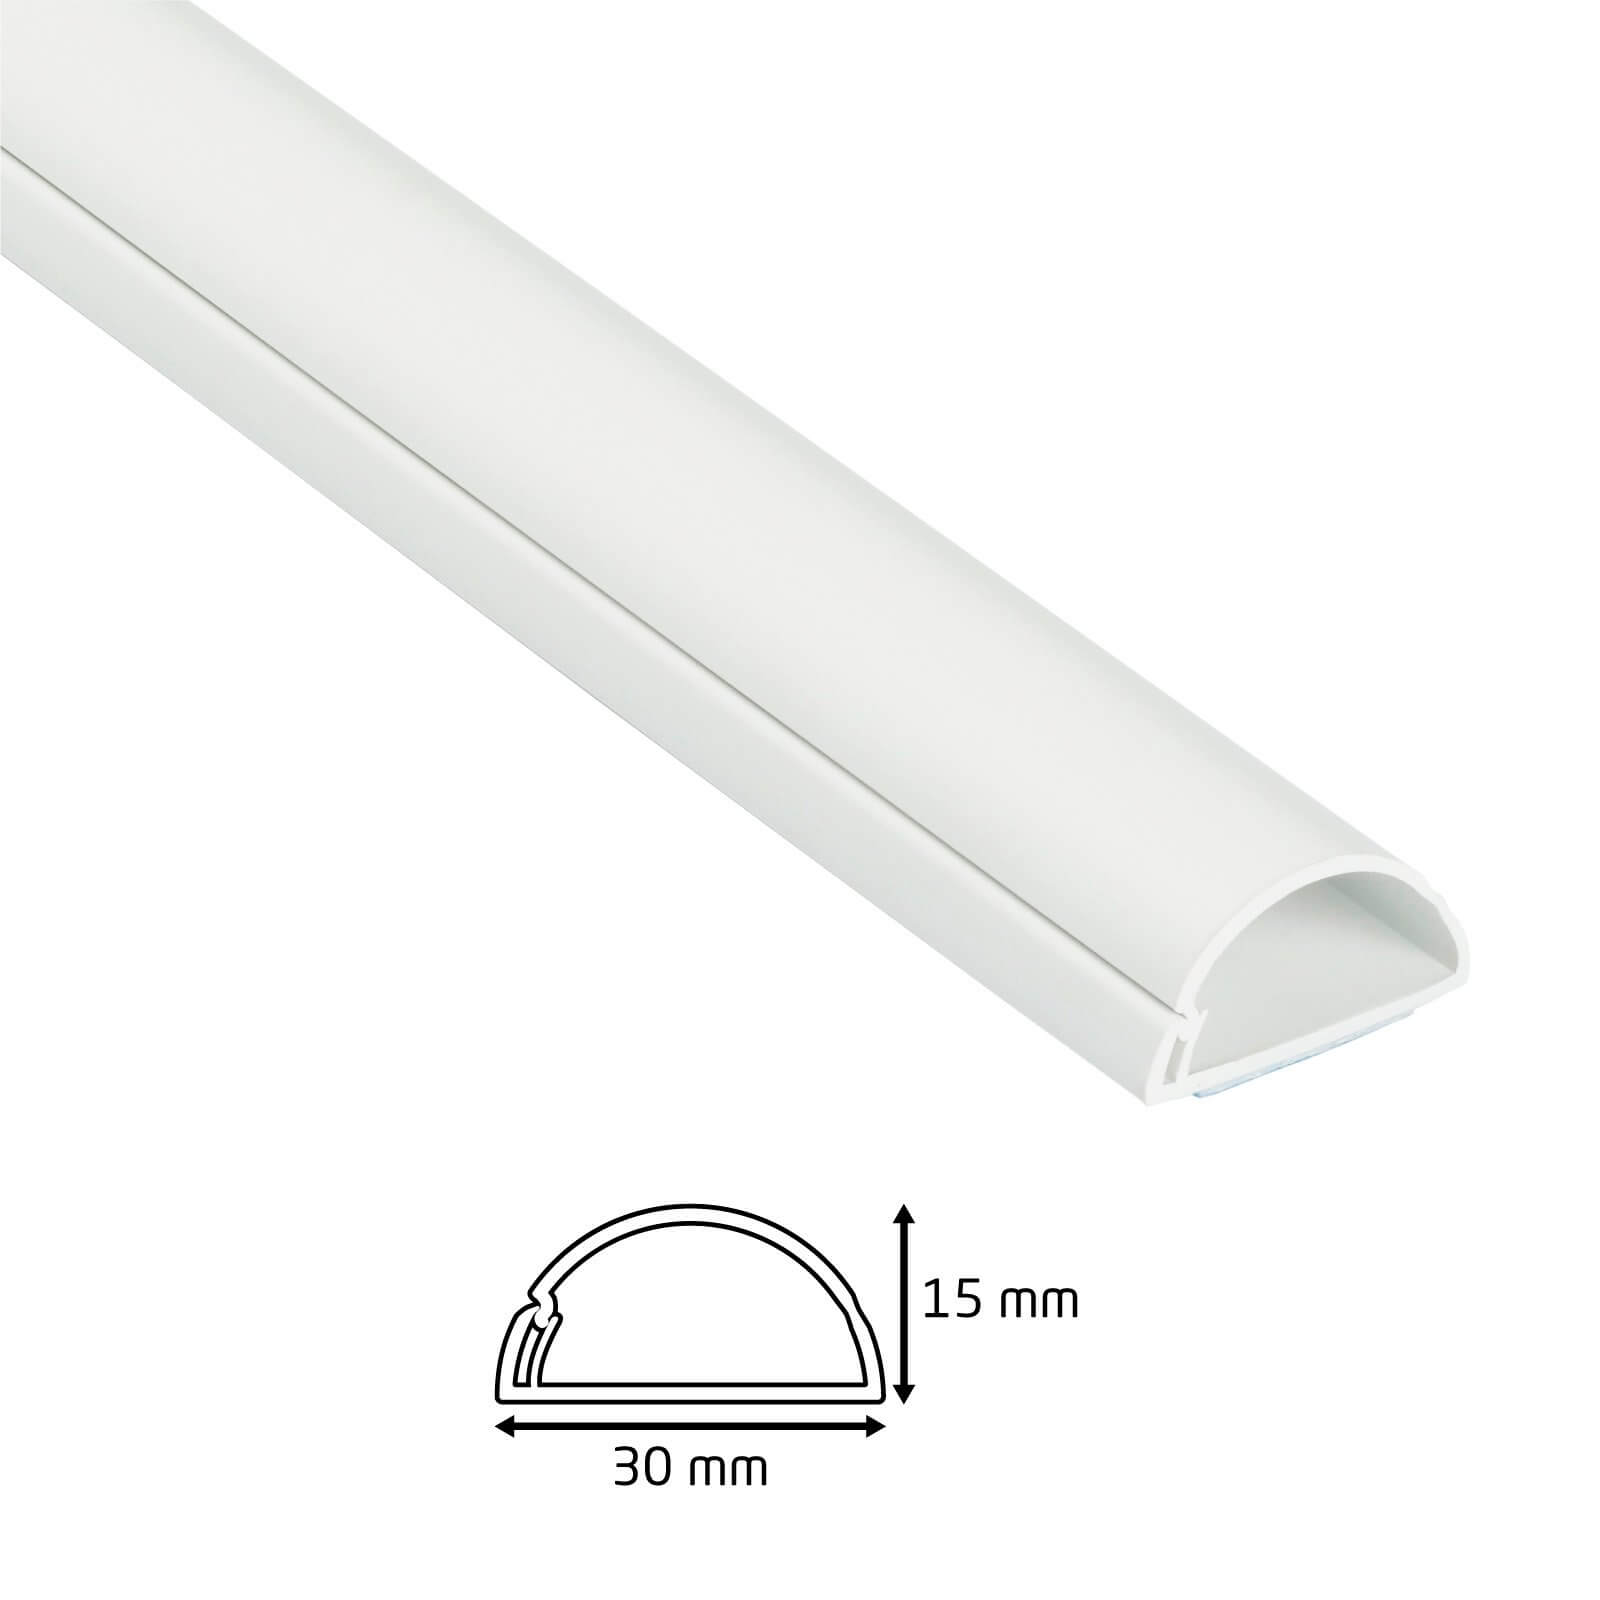 D-Line Mini Decorative Self Adhesive Trunking Multipack 3 x 30mm x 15mm x 1-meter Lengths & Accessories - White